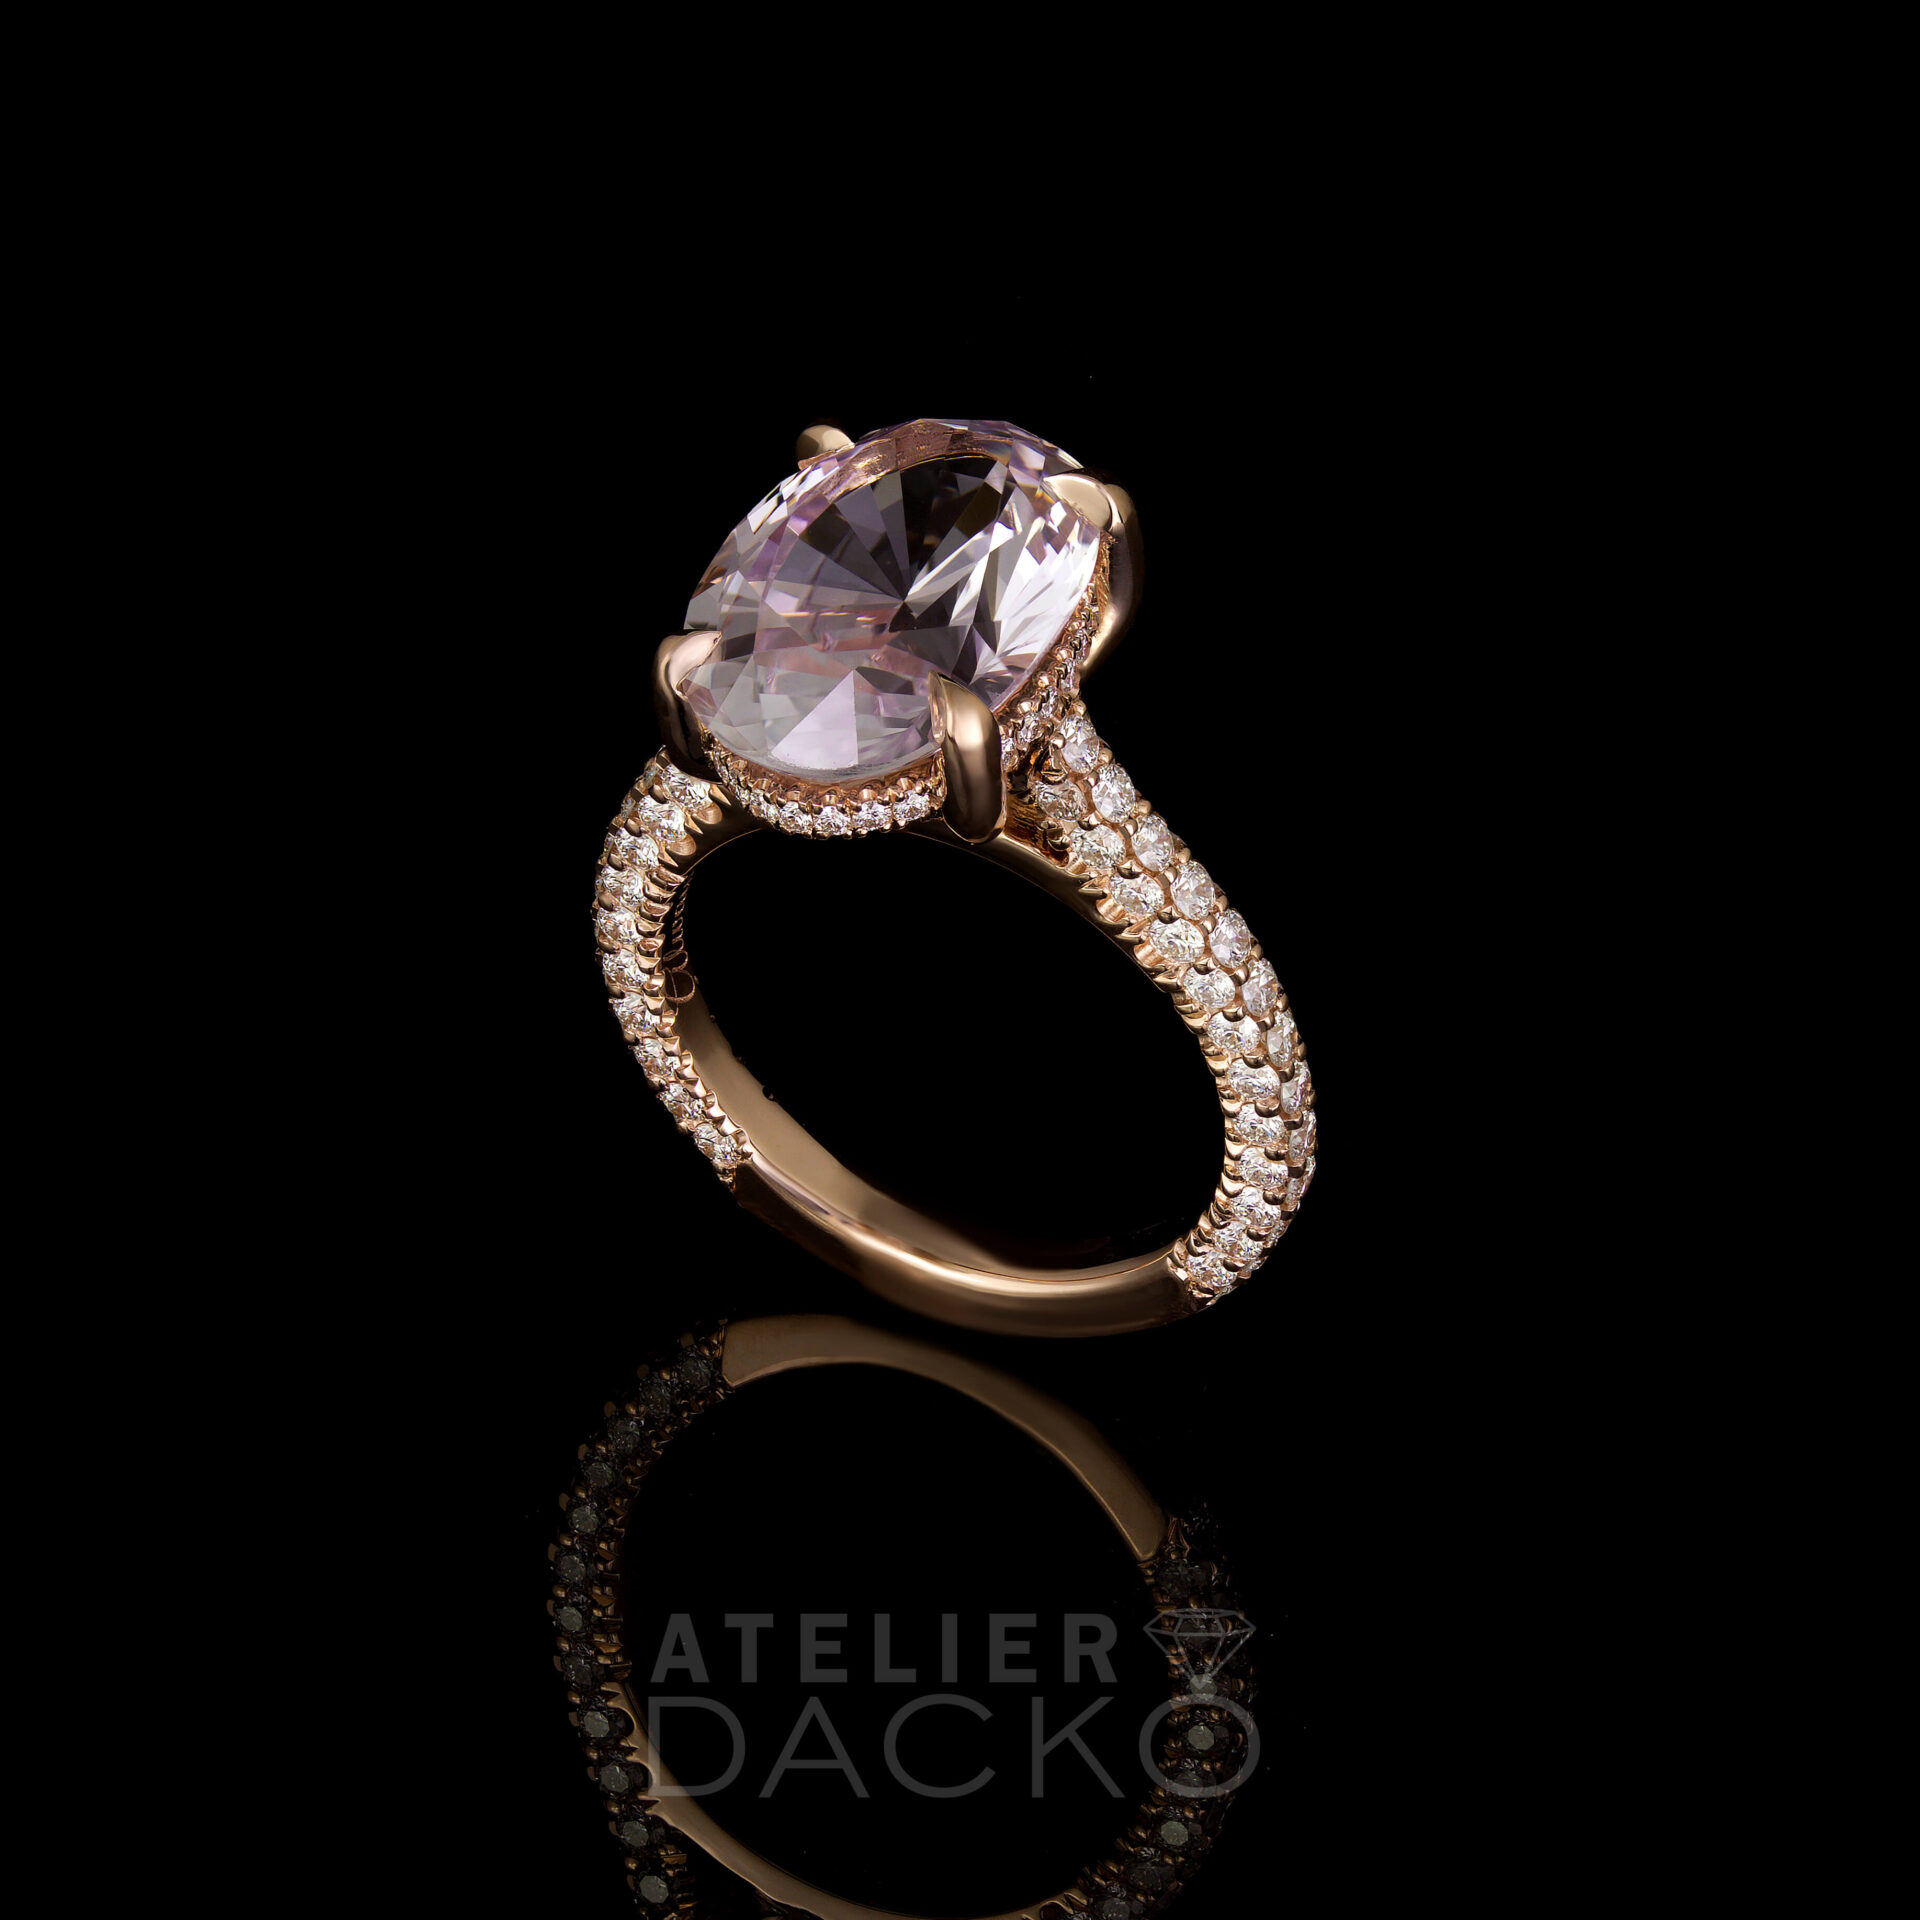 Bottom of 3 CT Pastel Pink Sapphire Engagement Ring